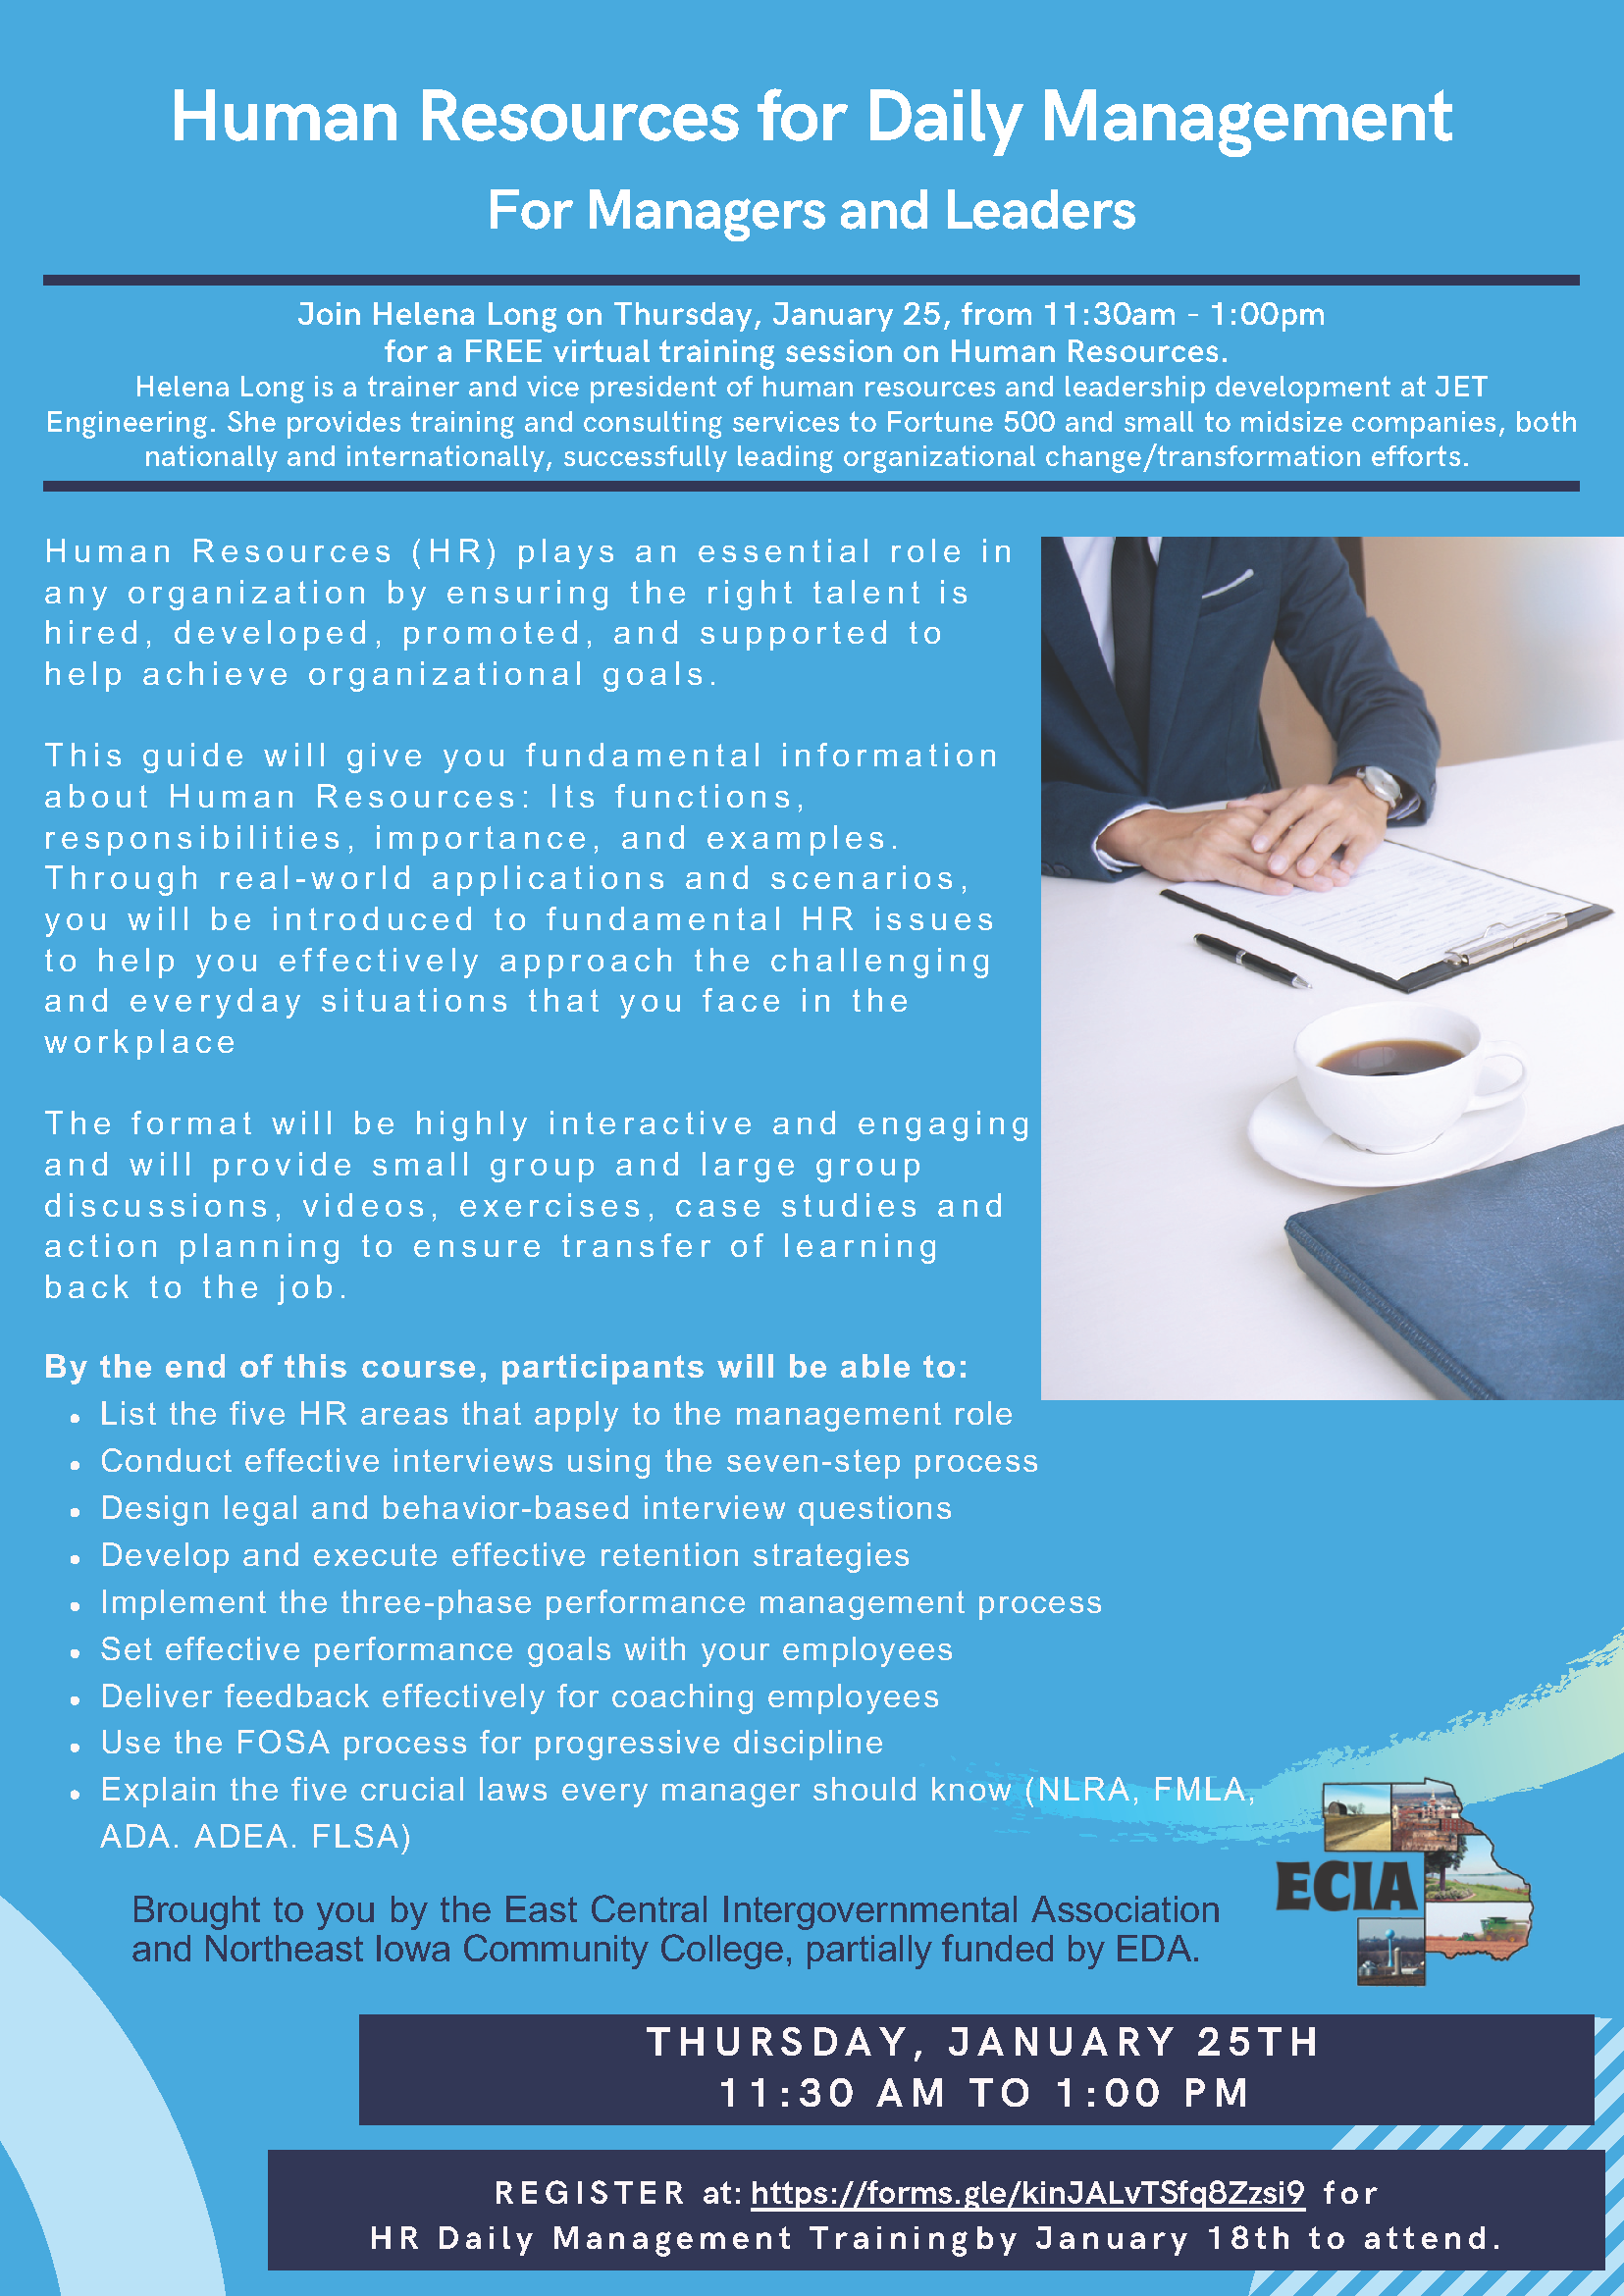 HR for Daily Management Training Flyer 1-25-23